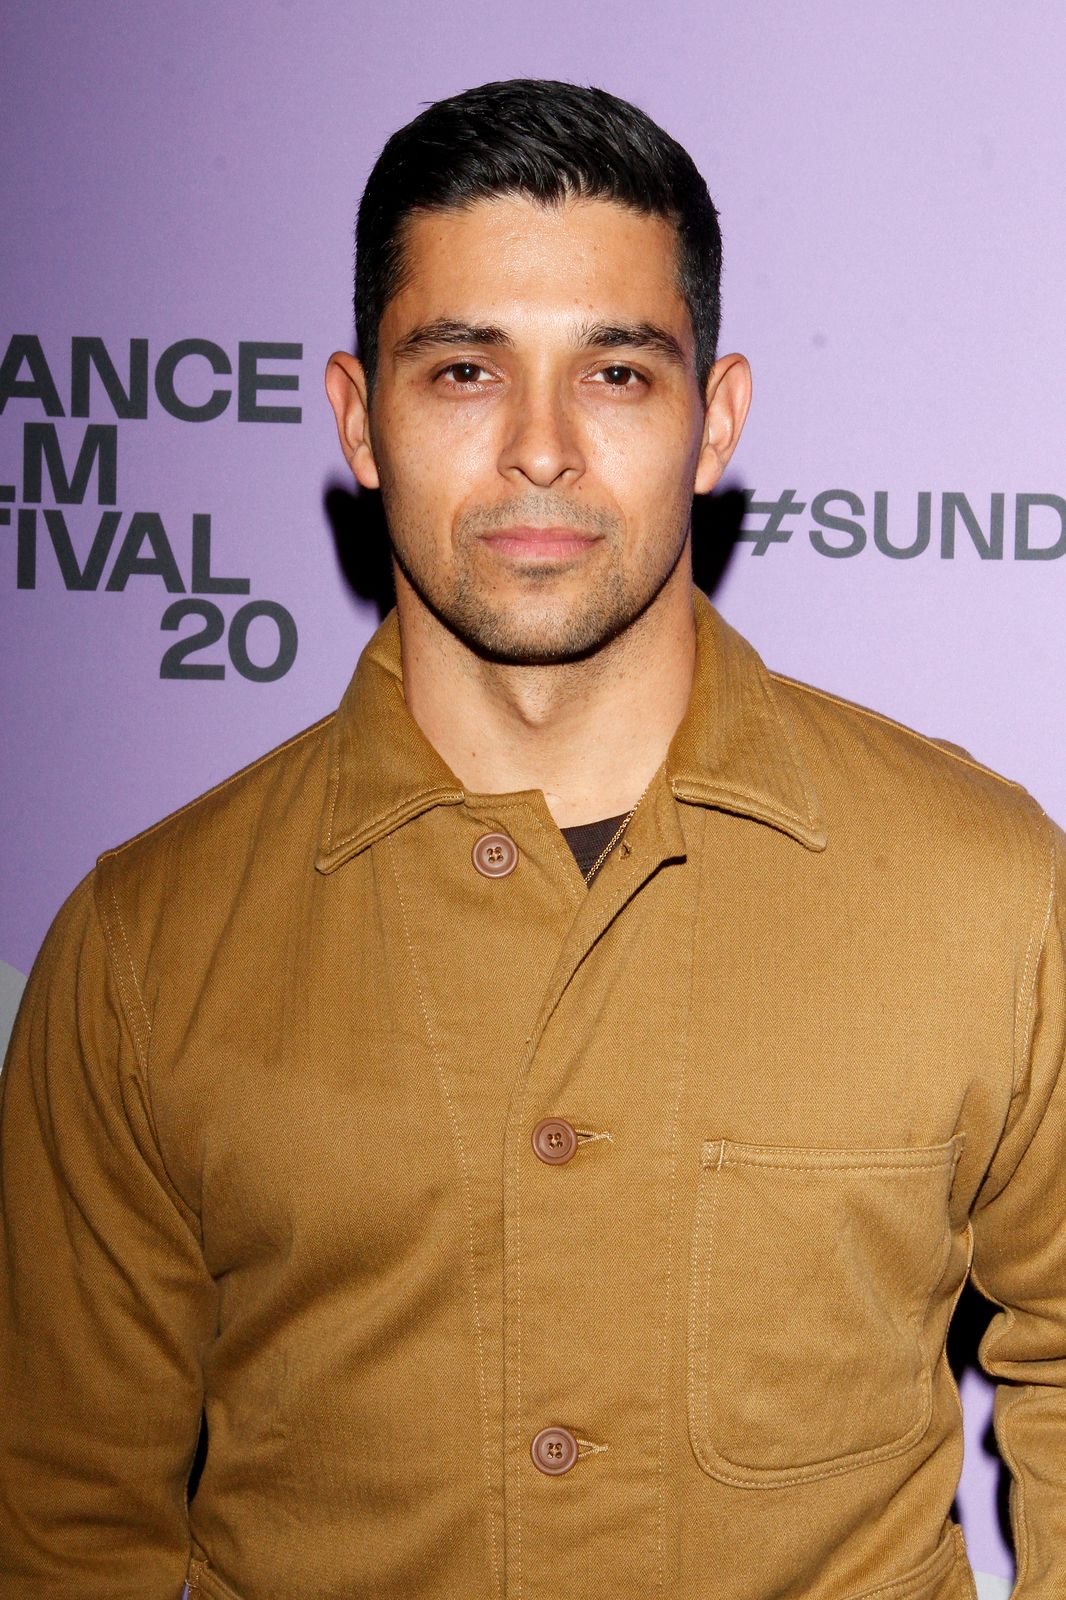 Wilmer Valderrama at the Sundance Film Festival - "Blast Beat" premiere at The Ray on January 26, 2020, in Park City, Utah | Photo: Jeremy Chan/Getty Images